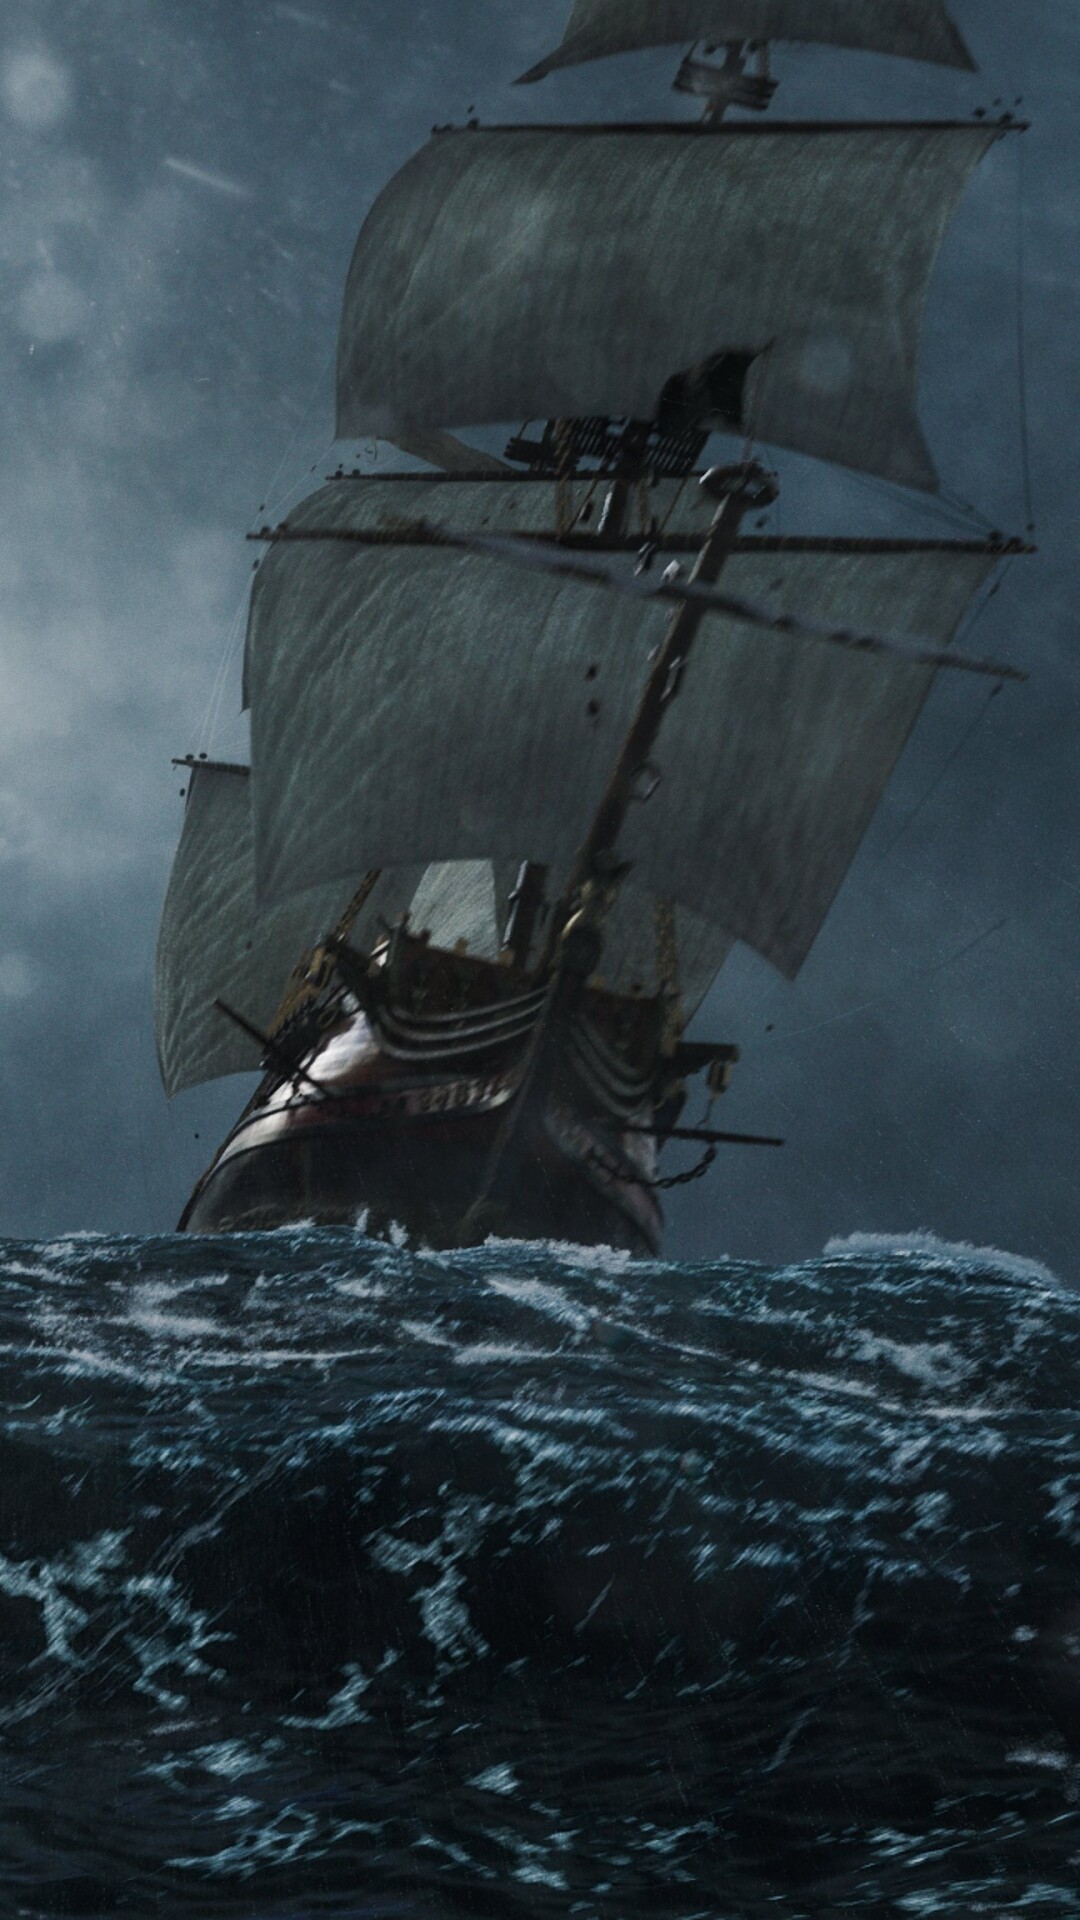 Ghost Ship: A boat that is said to be capable of appearing and disappearing at will. 1080x1920 Full HD Background.